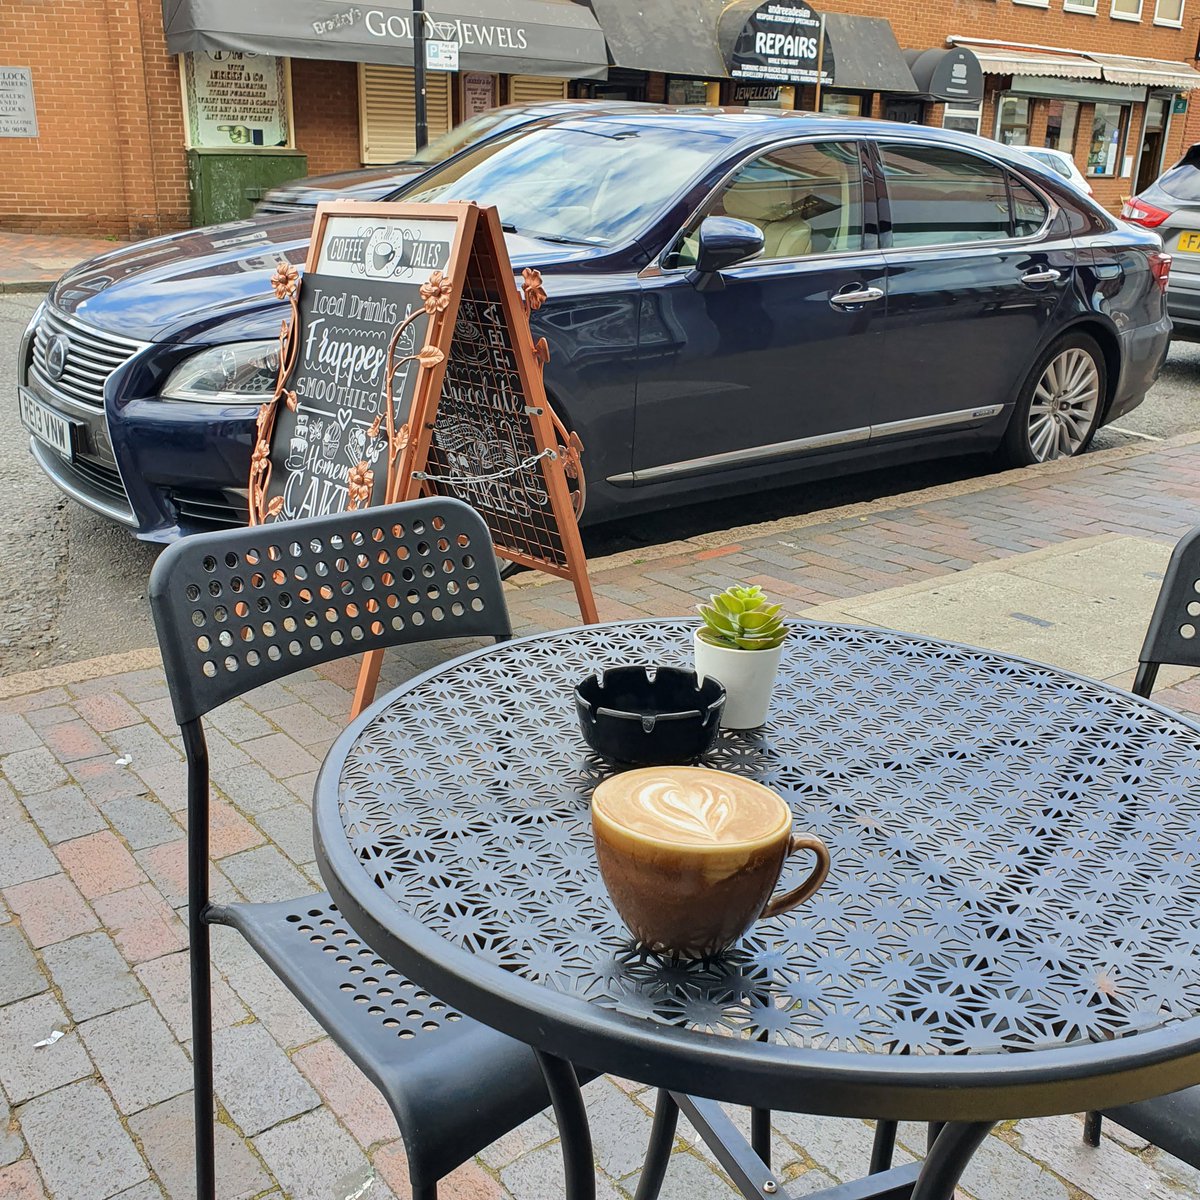 Going for a coffee & catch-up? Fancy a Sunday lunch? Here are 25 venues in the #JQ that offer outdoor seating!

jewelleryquarter.net/25-jq-venues-w…

Remember, stay safe and respect social distancing 😷

#JQIsOpen #KeepBrumSafe #BrumTogether #BrumHour